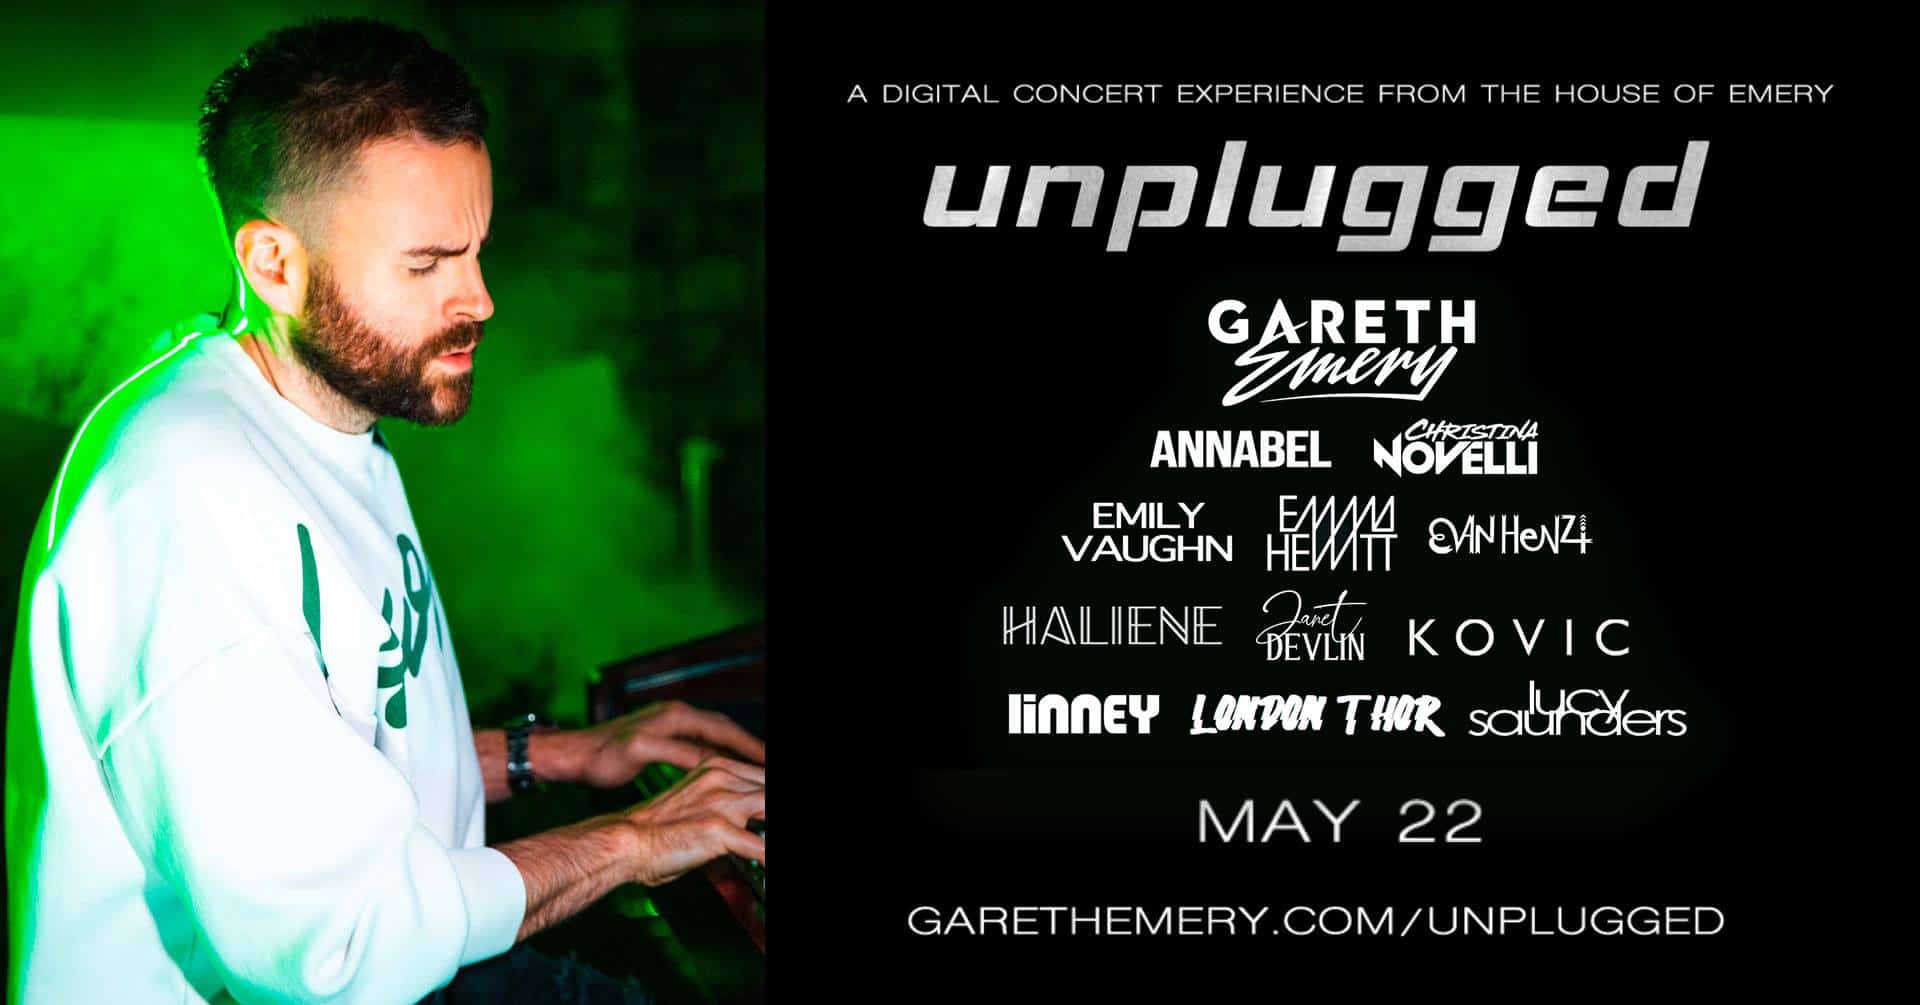 Gareth Emery Announces First-Ever UNPLUGGED Digital Concert Featuring the Greatest Vocalists in Trance Music